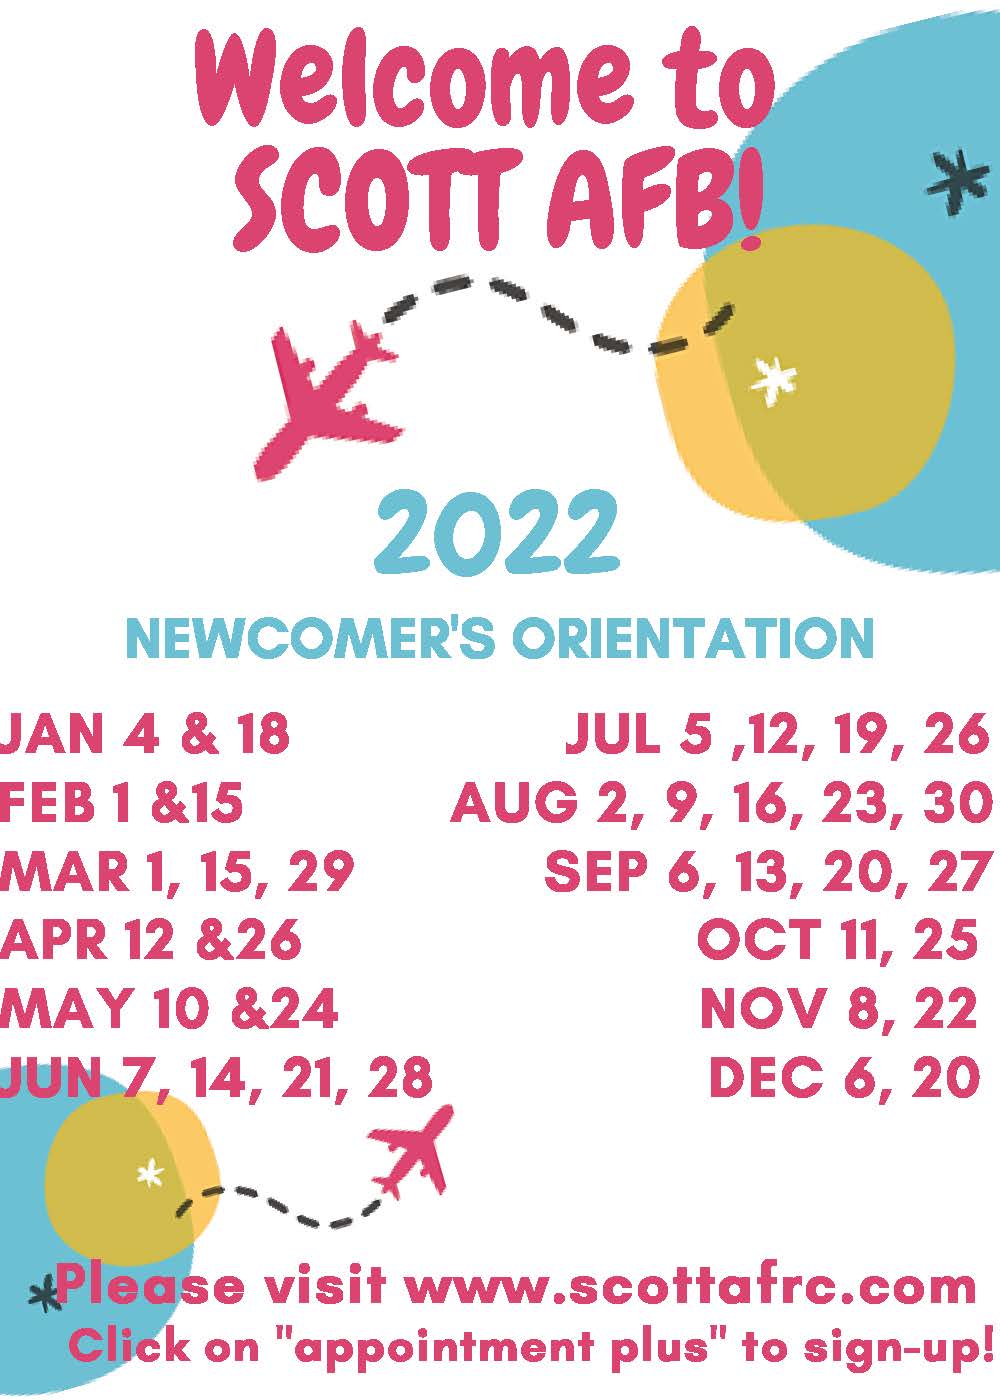 Dates for the newcomer's zoom